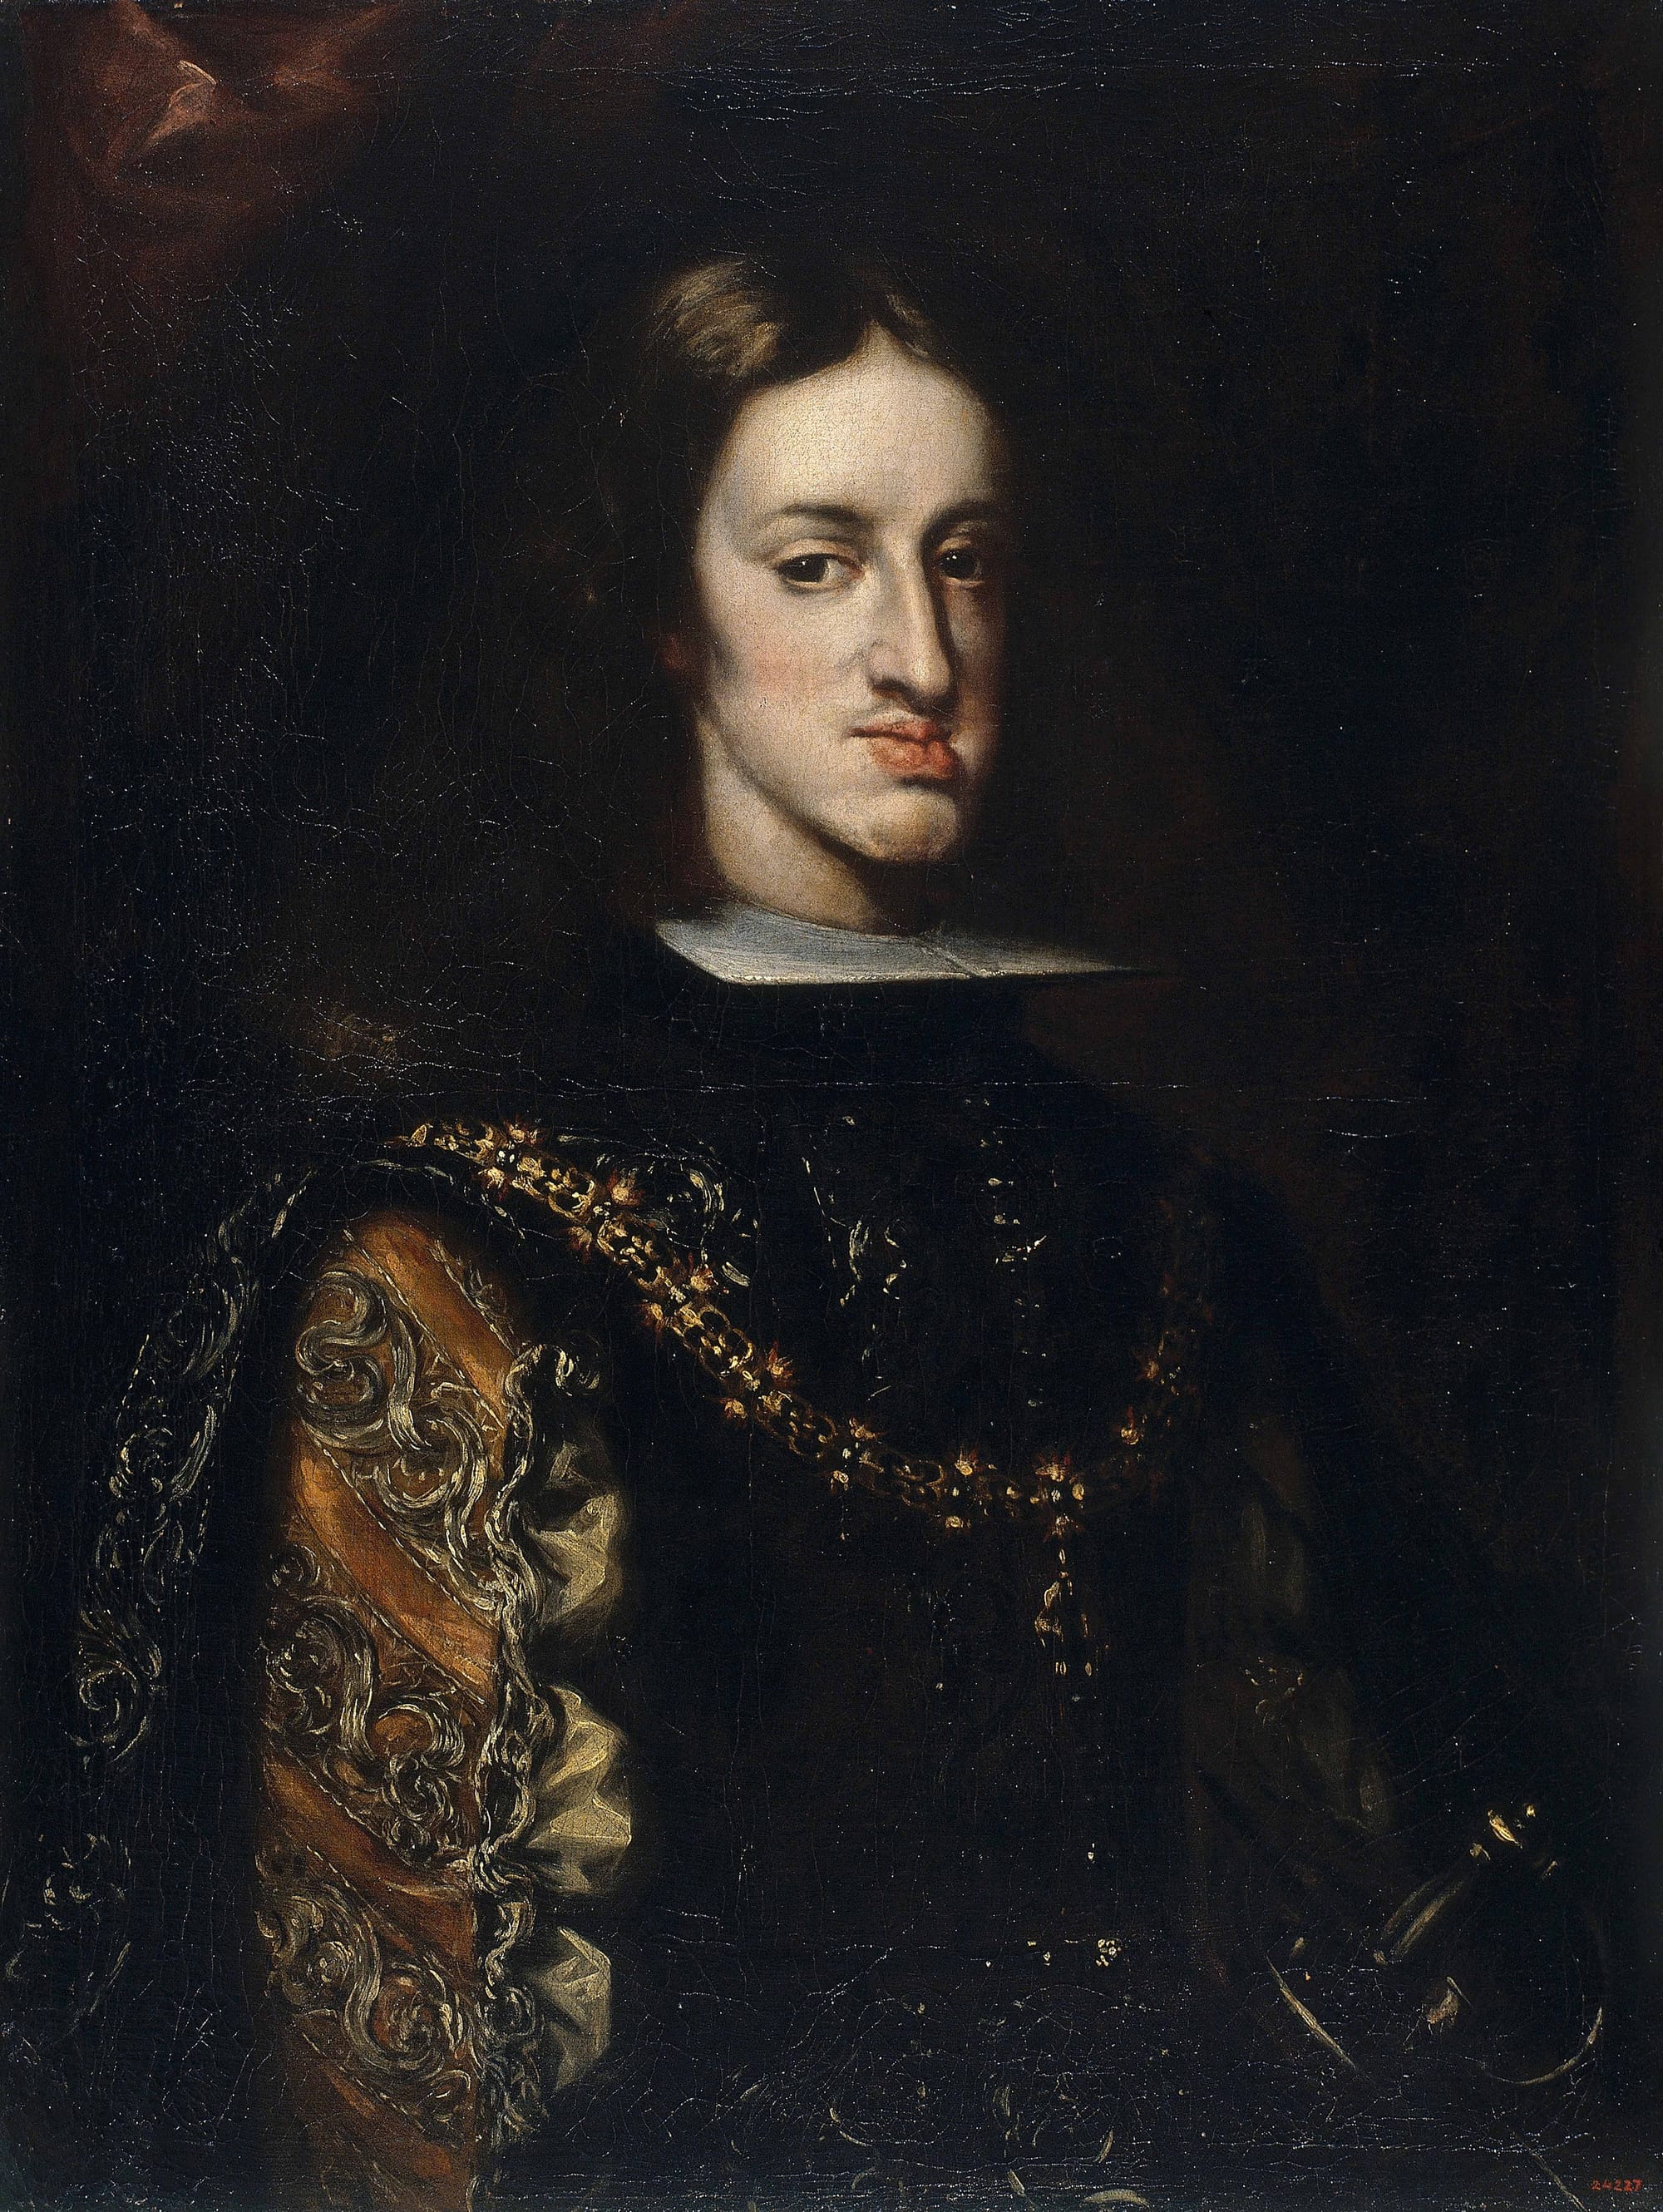 An unhappy-looking fellow, displaying the royal "Habsburg Jaw." https://en.wikipedia.org/wiki/Prognathism